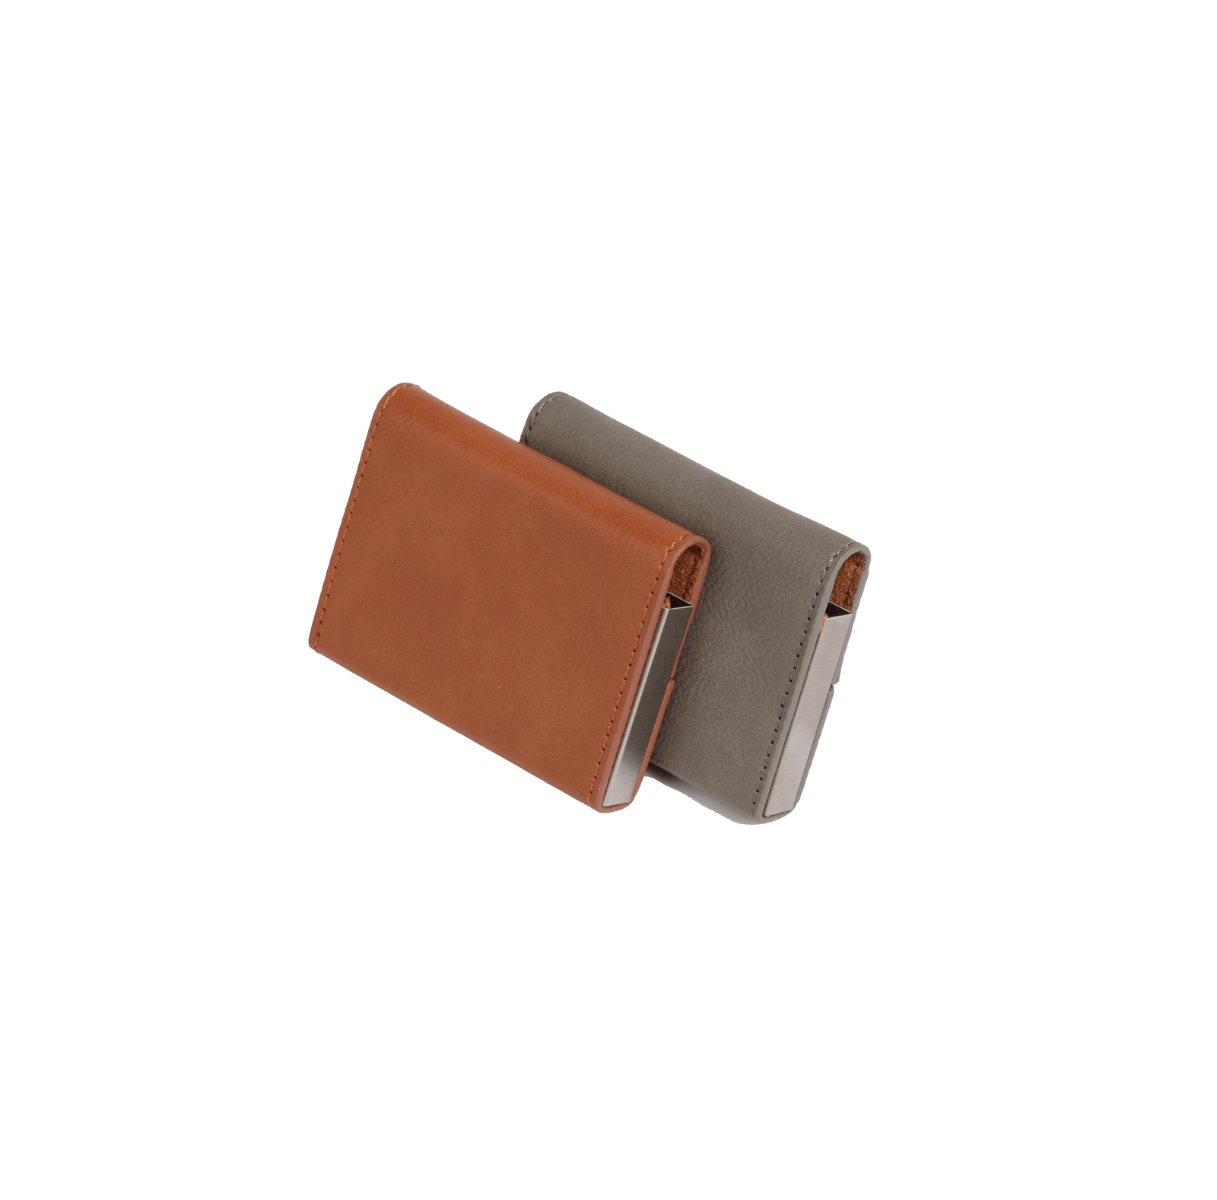 hard card case in two different colors